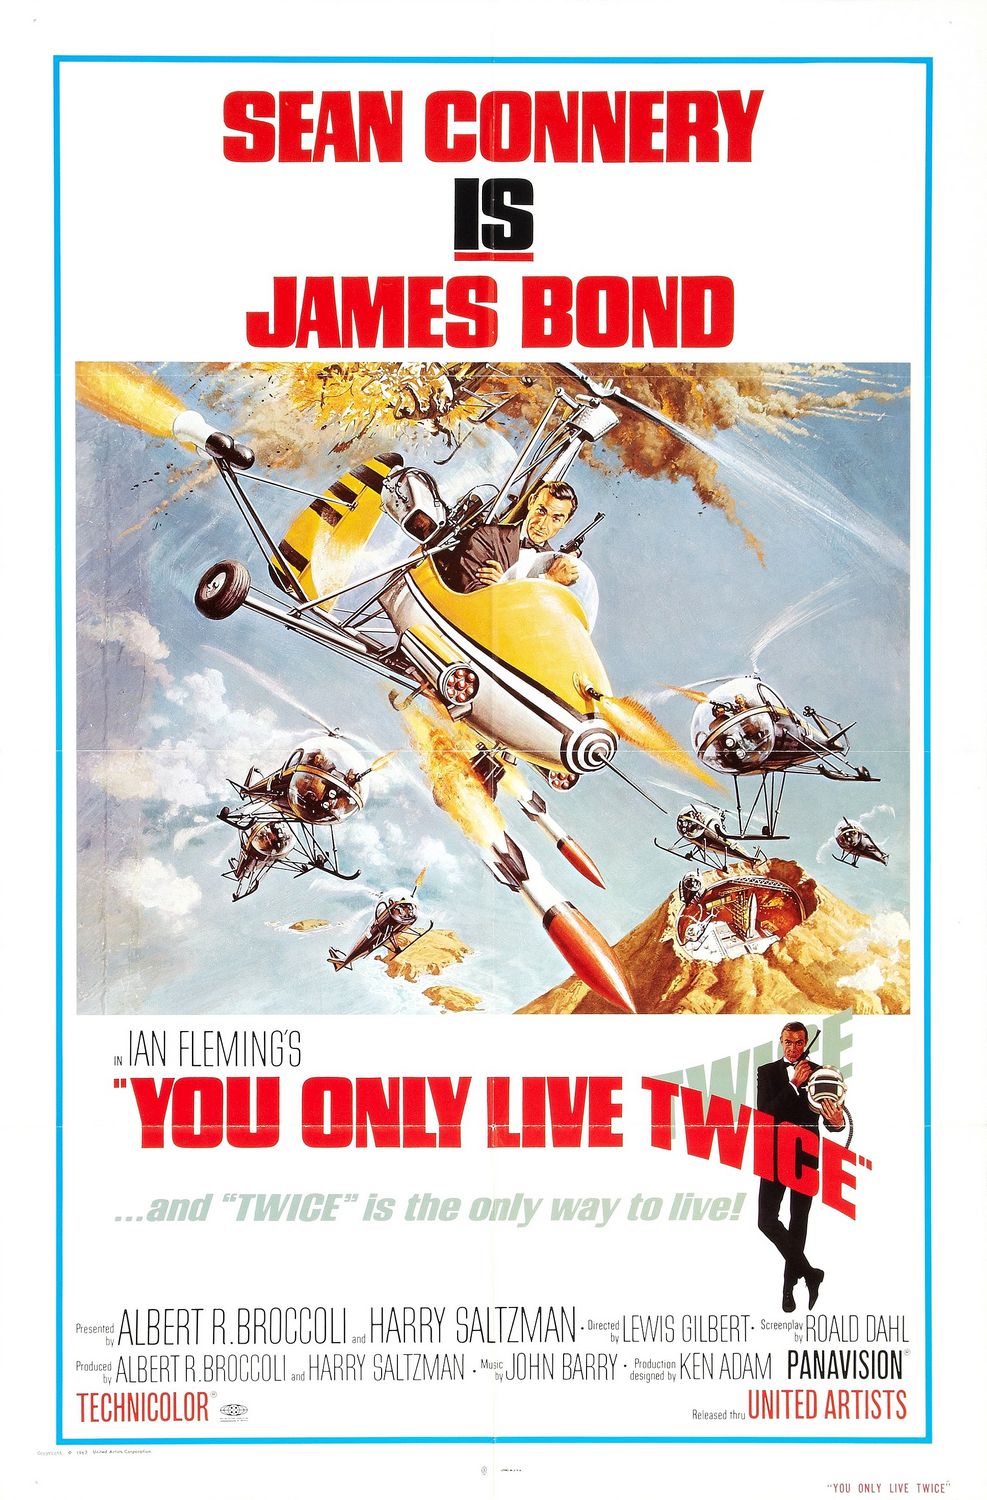 007 SI VIVE SOLO DUE VOLTE YOU ONLY LIVE TWICE POSTER JAMES BOND SEAN CONNERY 